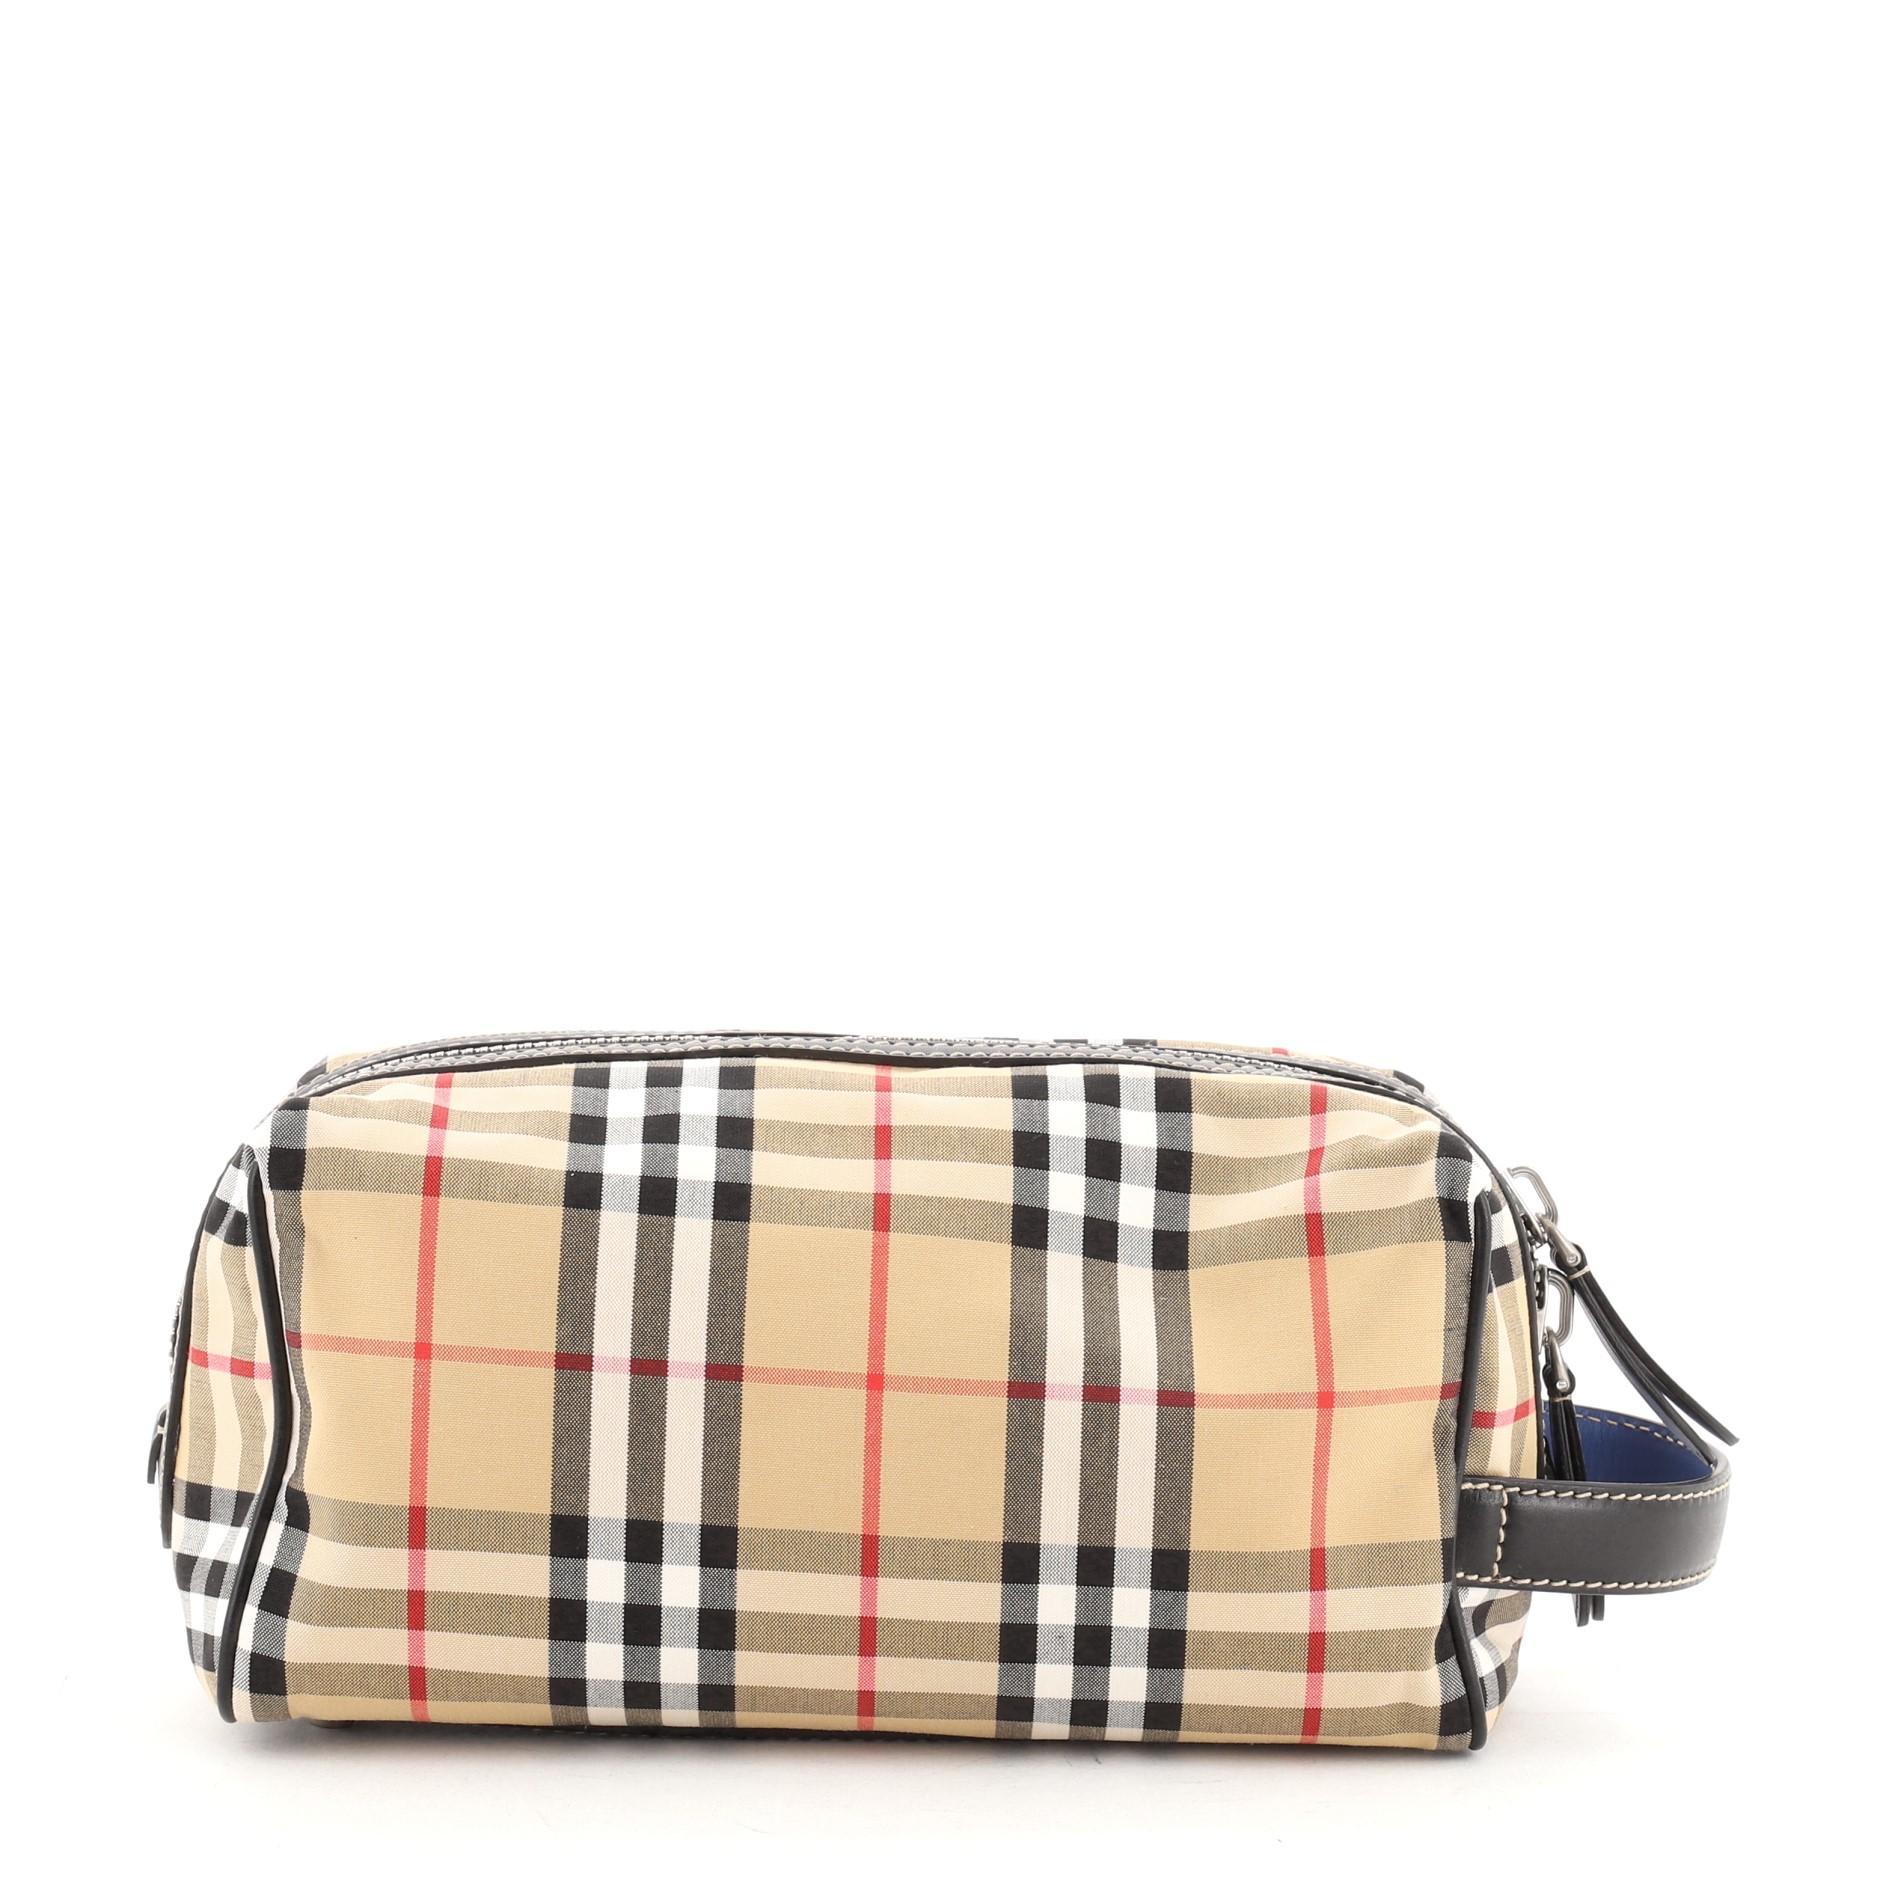 Burberry Cosmetic Pouch Vintage Check Canvas
Beige Novachek

Condition Details: Light wear on exterior, minor scuffs on exterior leather trims. Glue stains on opening corners and zipper pull, scratches on hardware.

45081MSC

Height 5